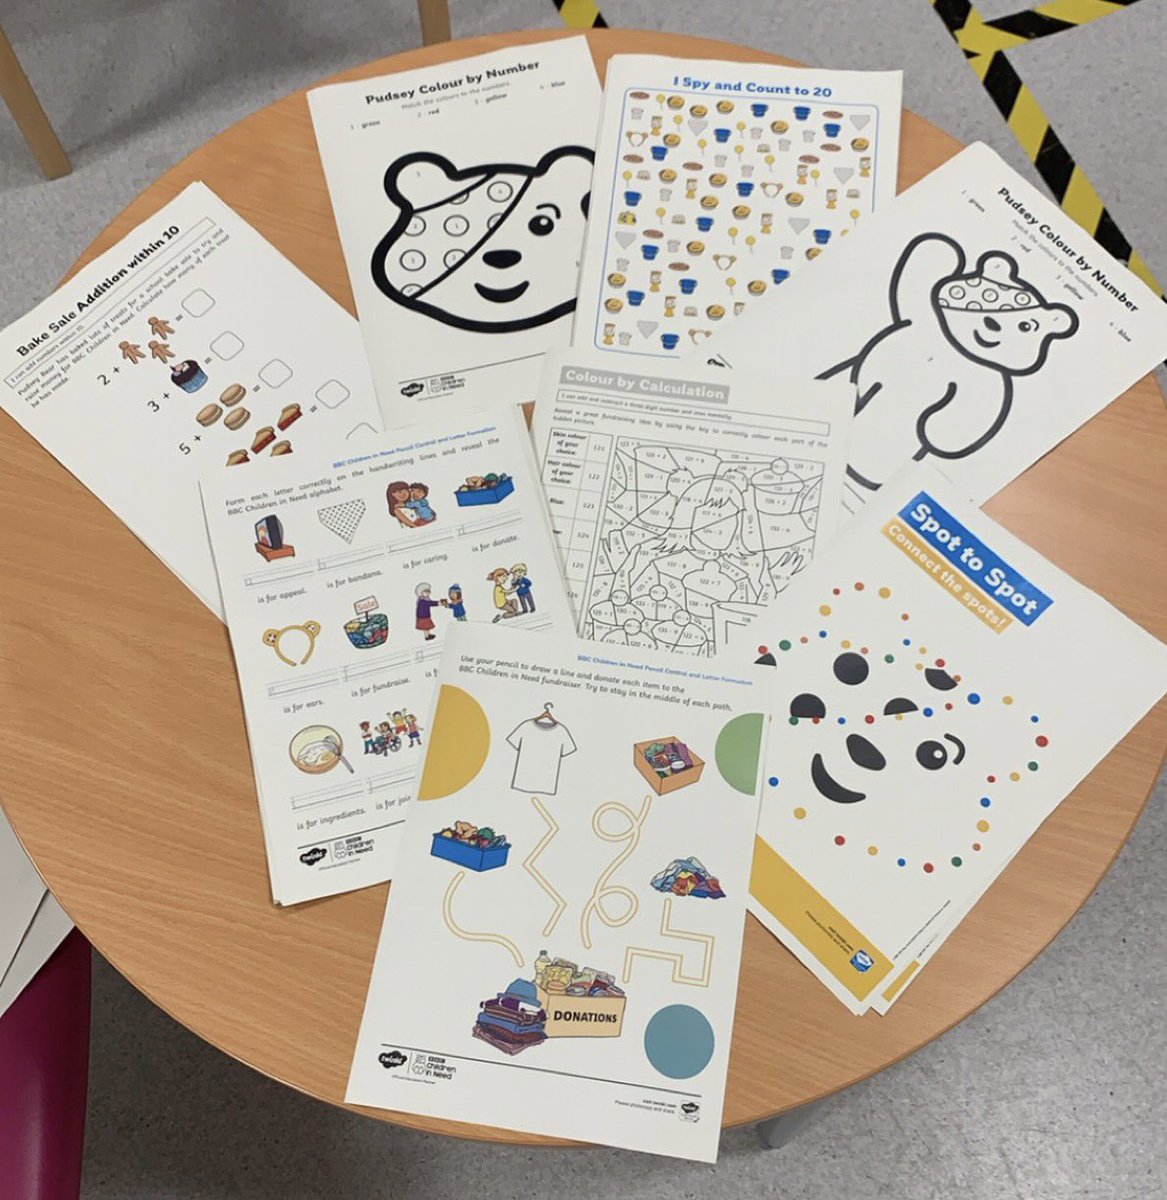 Amazing @ChiIdreninNeed activity and colouring pages on @twinklresources perfect for Monday morning. @nahpsofficial #twinklteach